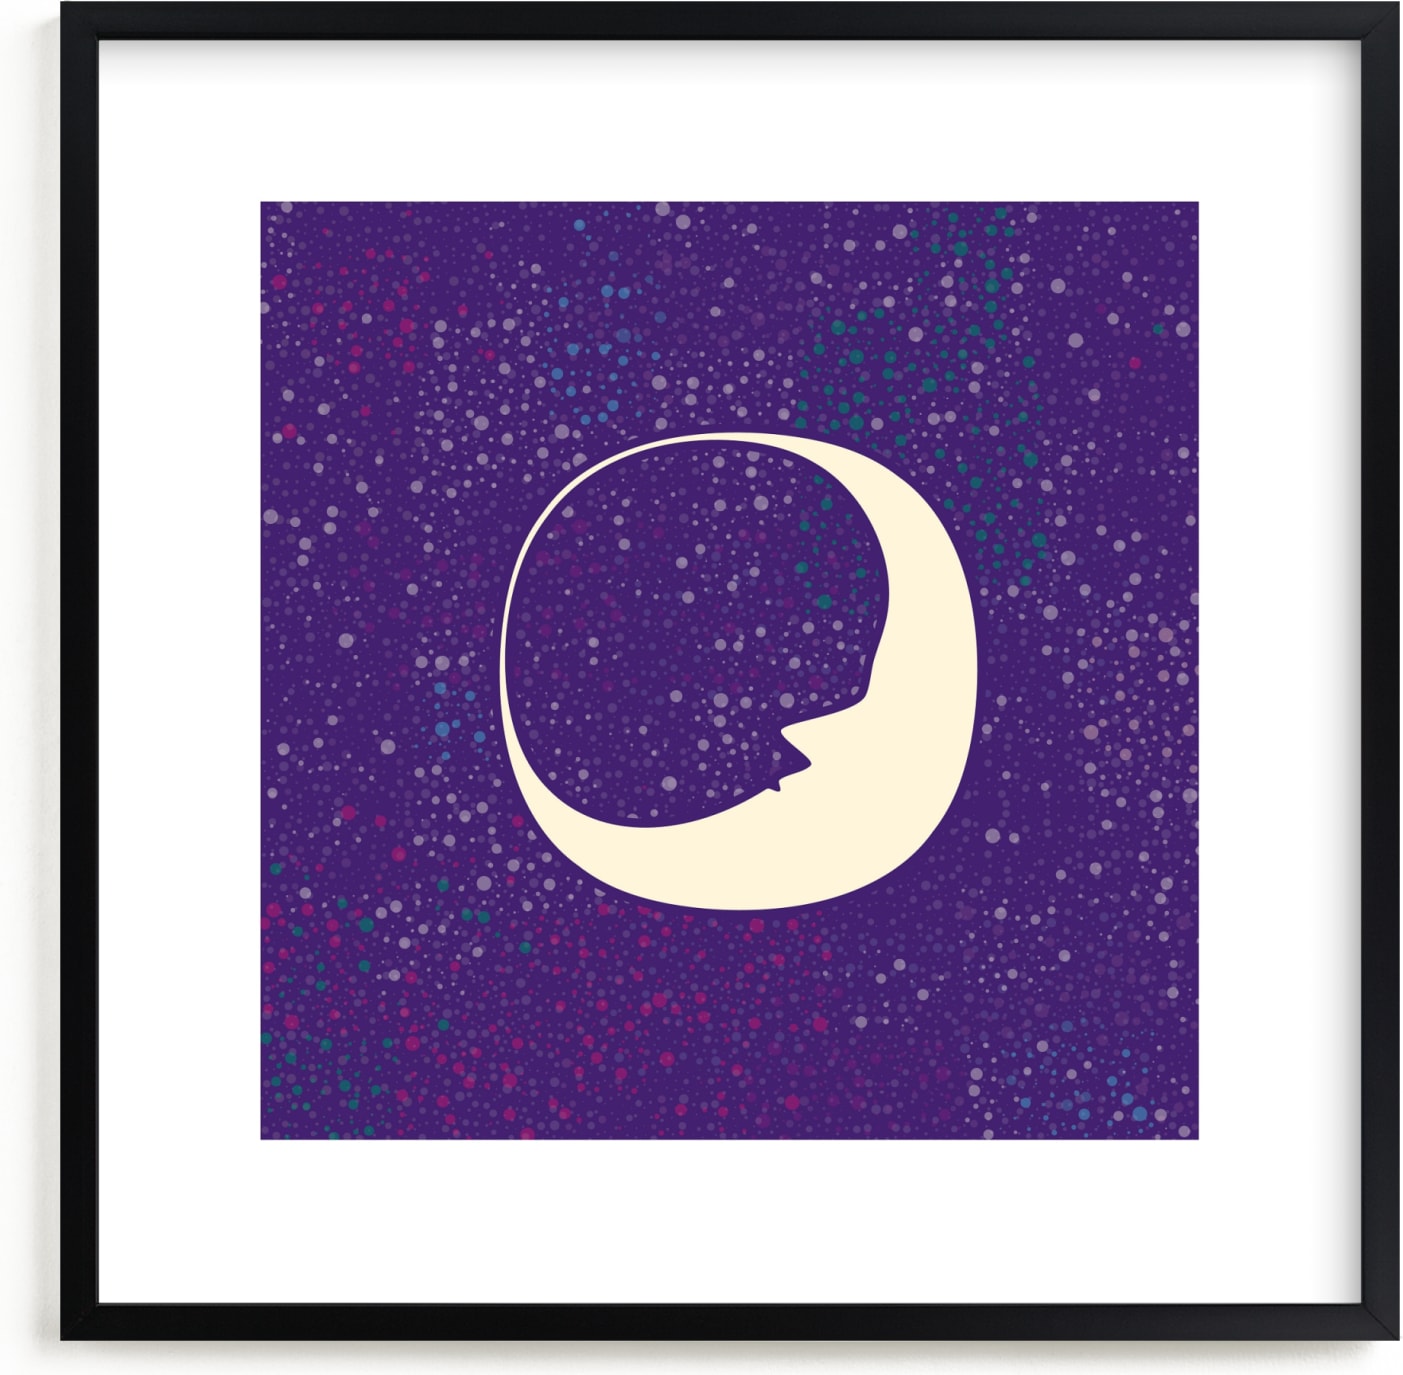 This is a purple nursery wall art by Katherine Morgan called Celestial Moon.